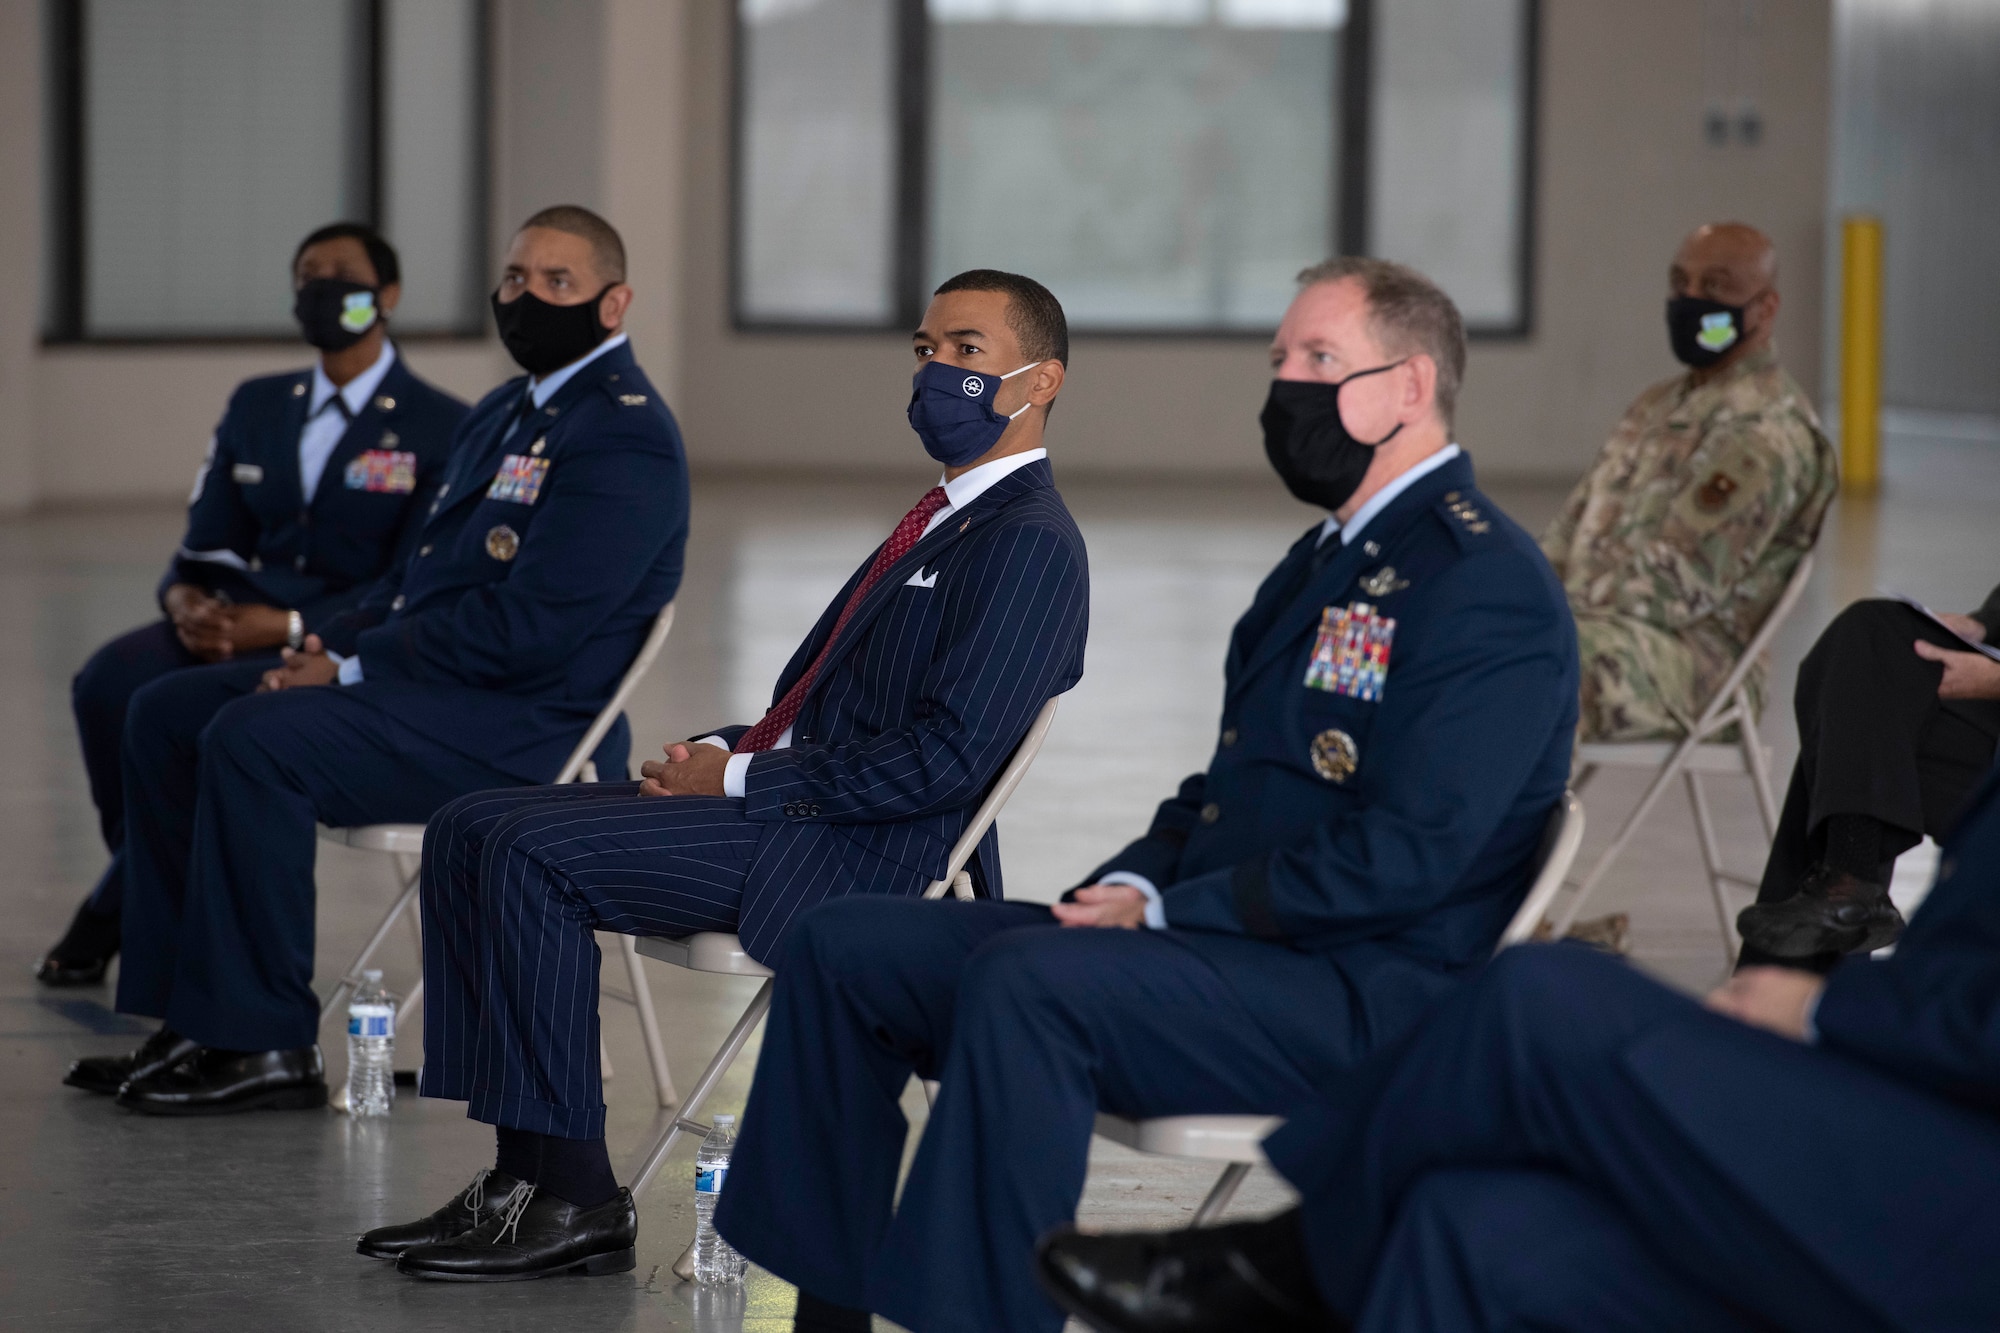 Mayor of Montgomery Steven Reed sits in attendance of Maxwell Air Force Base's Veteran's Day ceremony Nov. 11, 2020. (U.S. Air Force photo by Senior Airman Charles Welty)